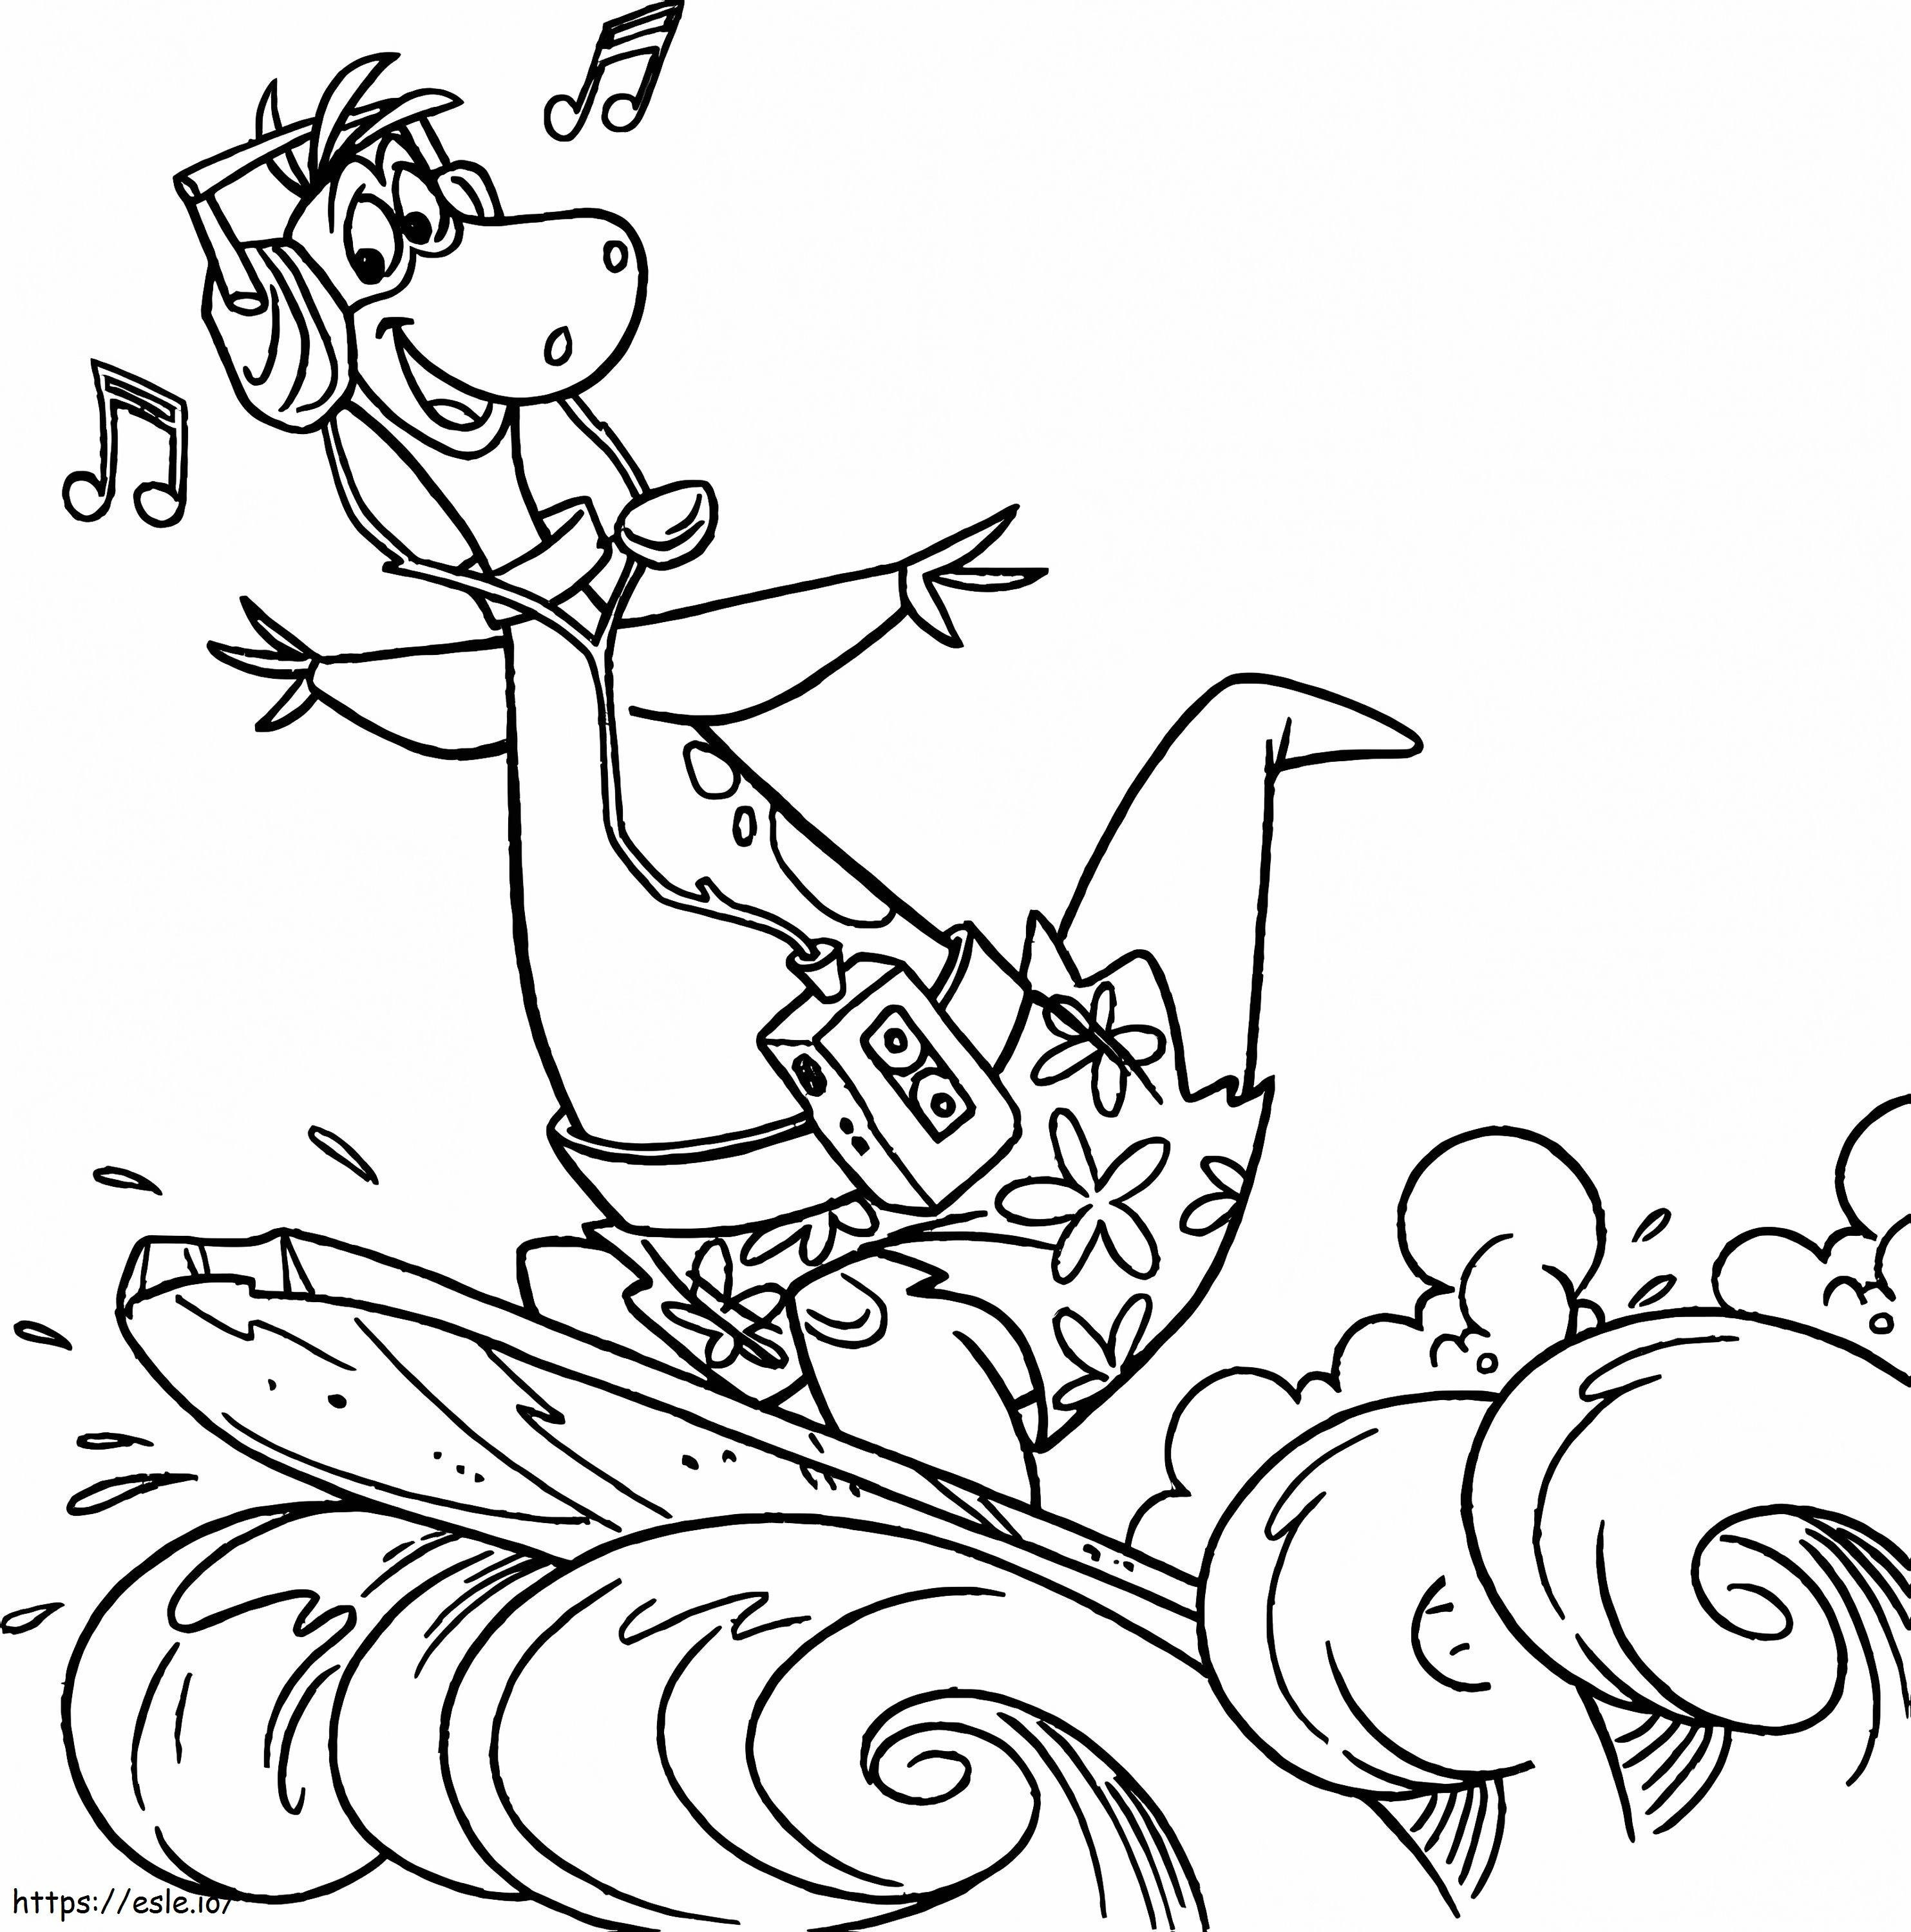 Dino From Flintstones coloring page